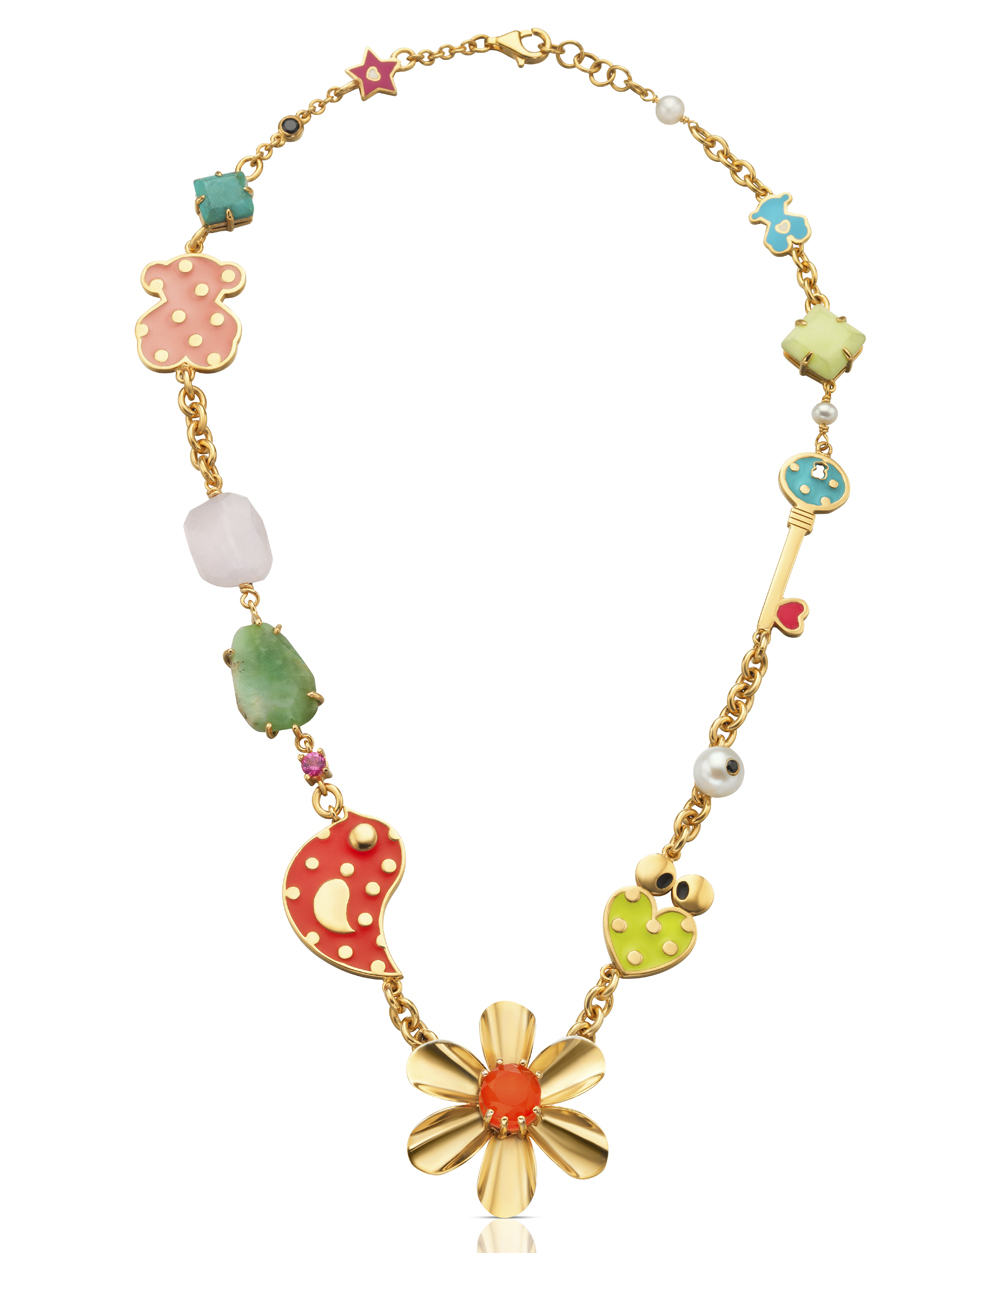 Necklace, $840, by Tous.